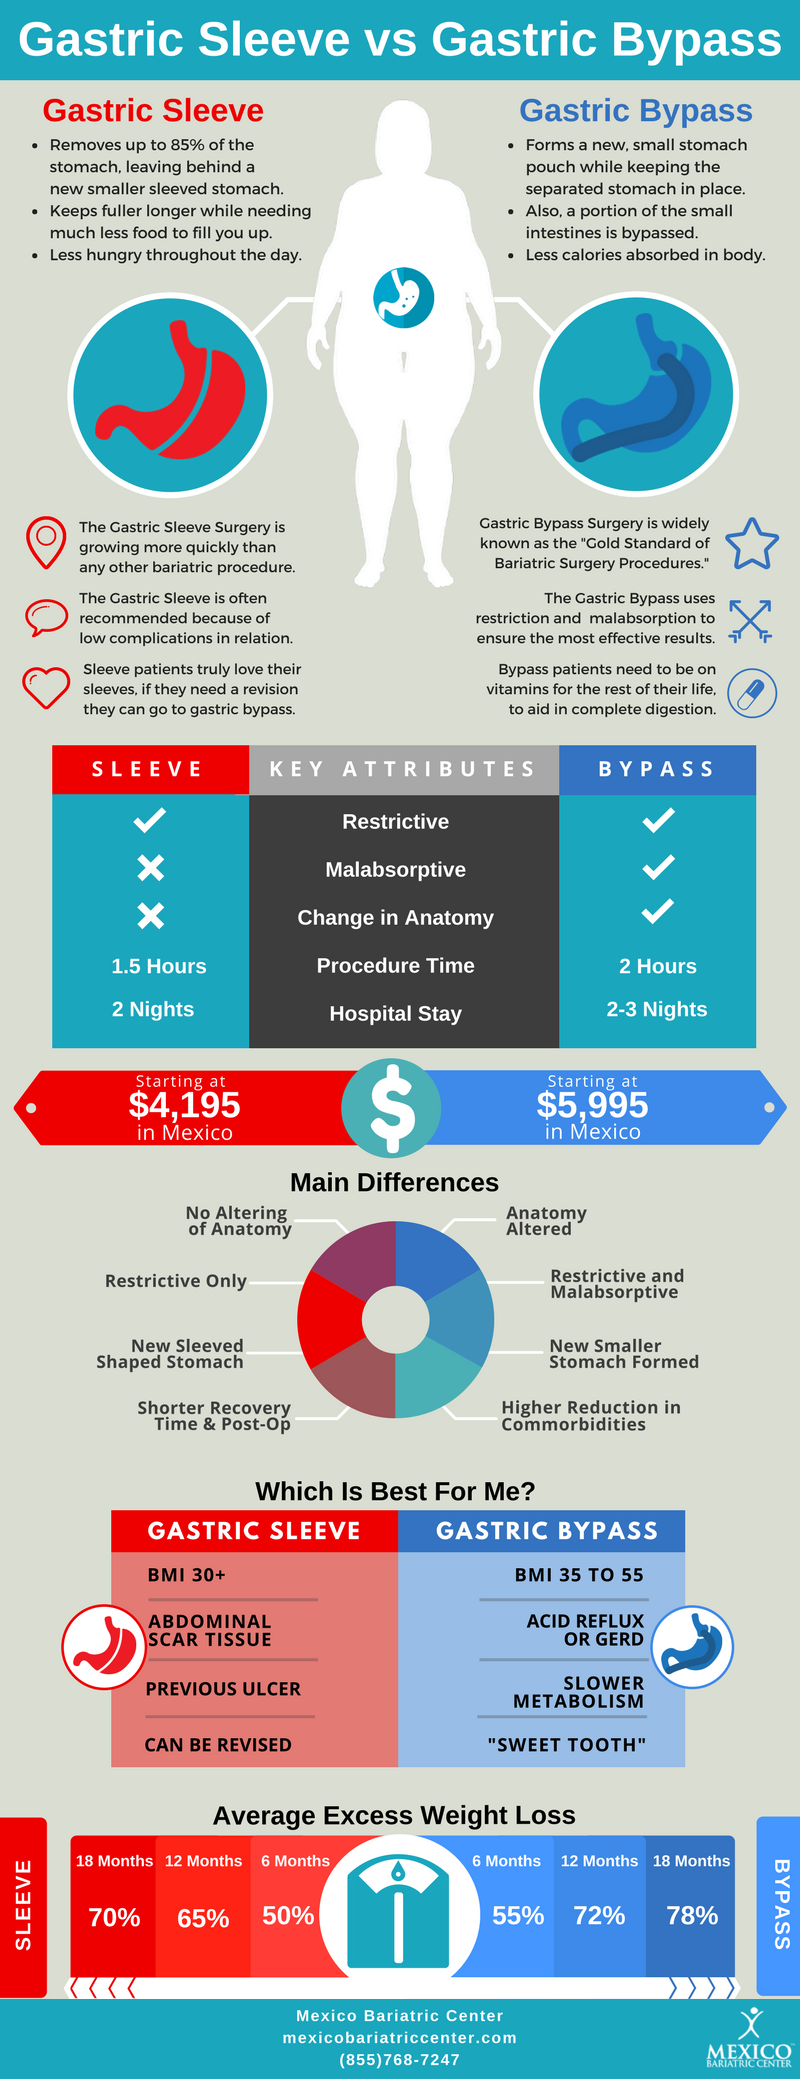 Gastric Sleeve vs Gastric Bypass Infographic